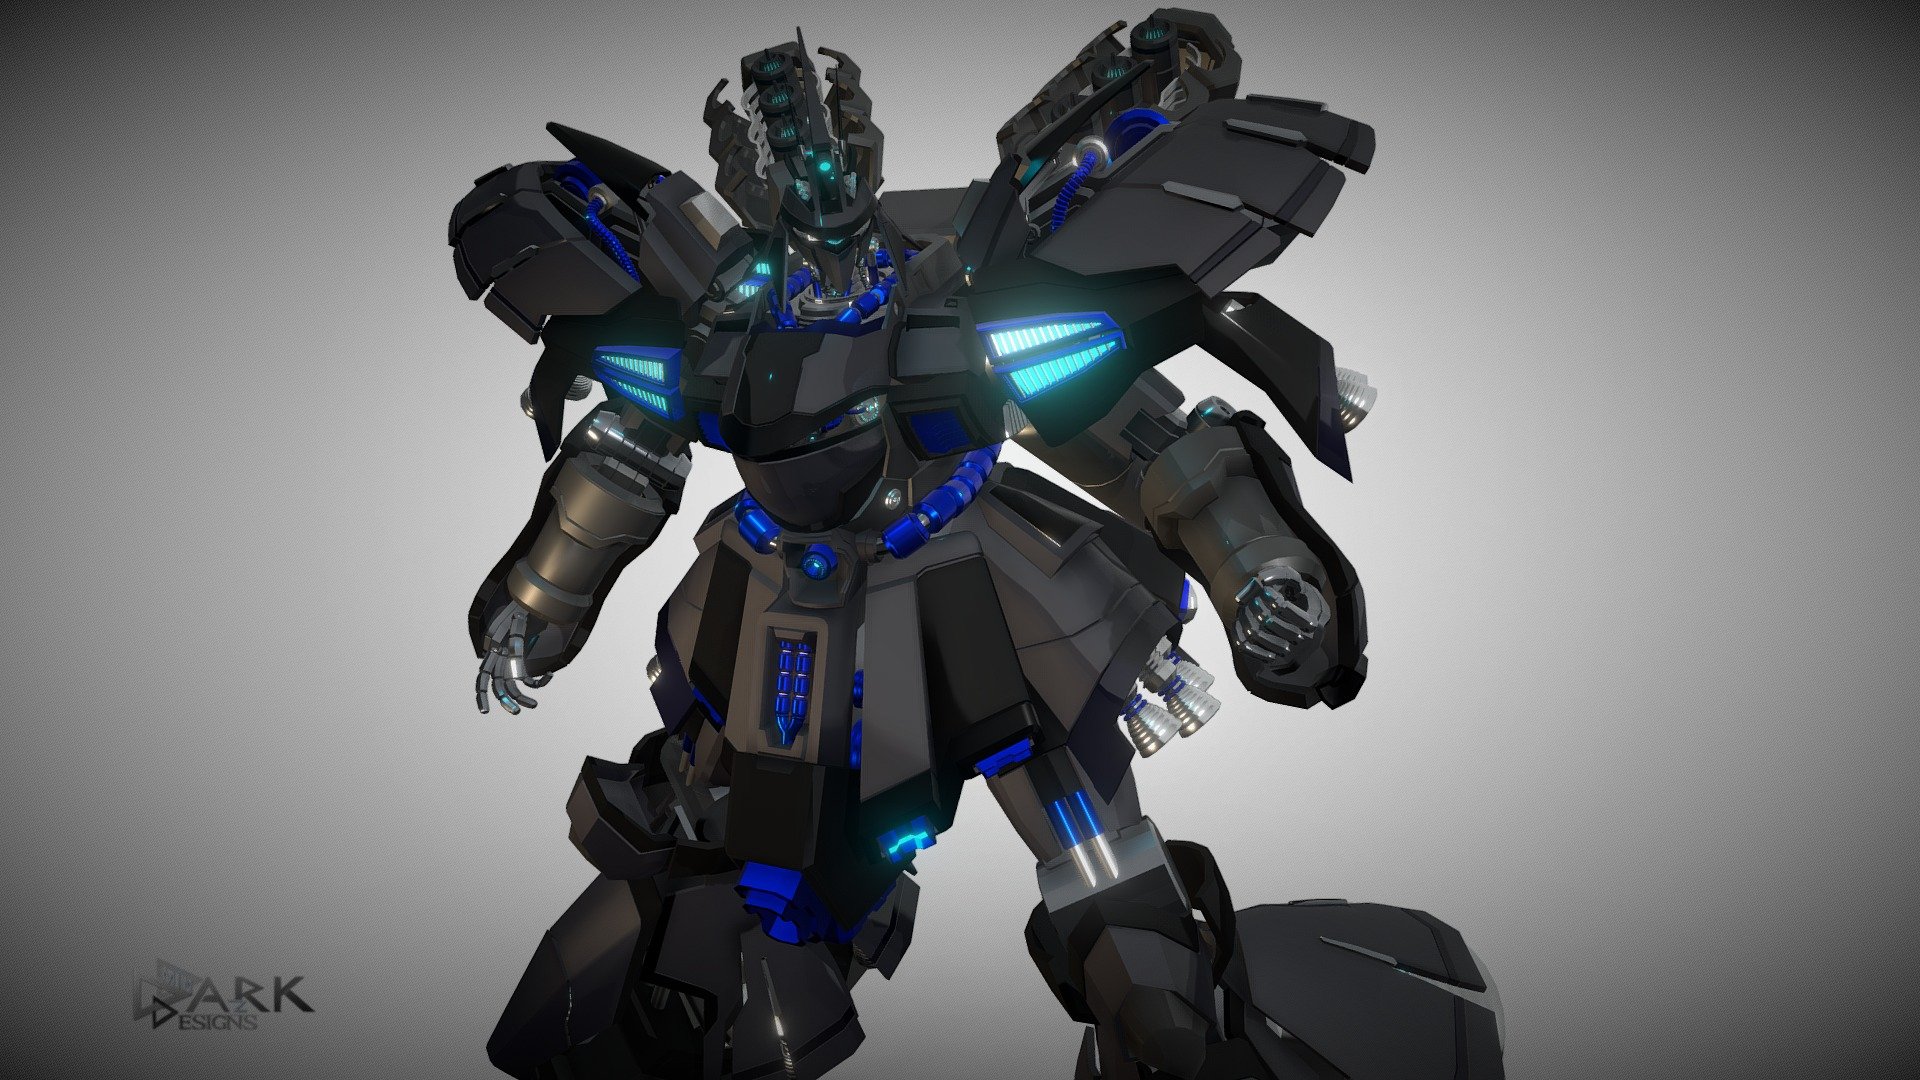 I wanted to make the Gundam a bit more in Black and blue instead of the red version.
Changed: 
light, env, 
emissive, colors, some layers got clear coat, metallic/roughness changes
post effects - pretty much all except for cromatic and grain

Based on &ldquo;SAZABI MSN-04 Gundam